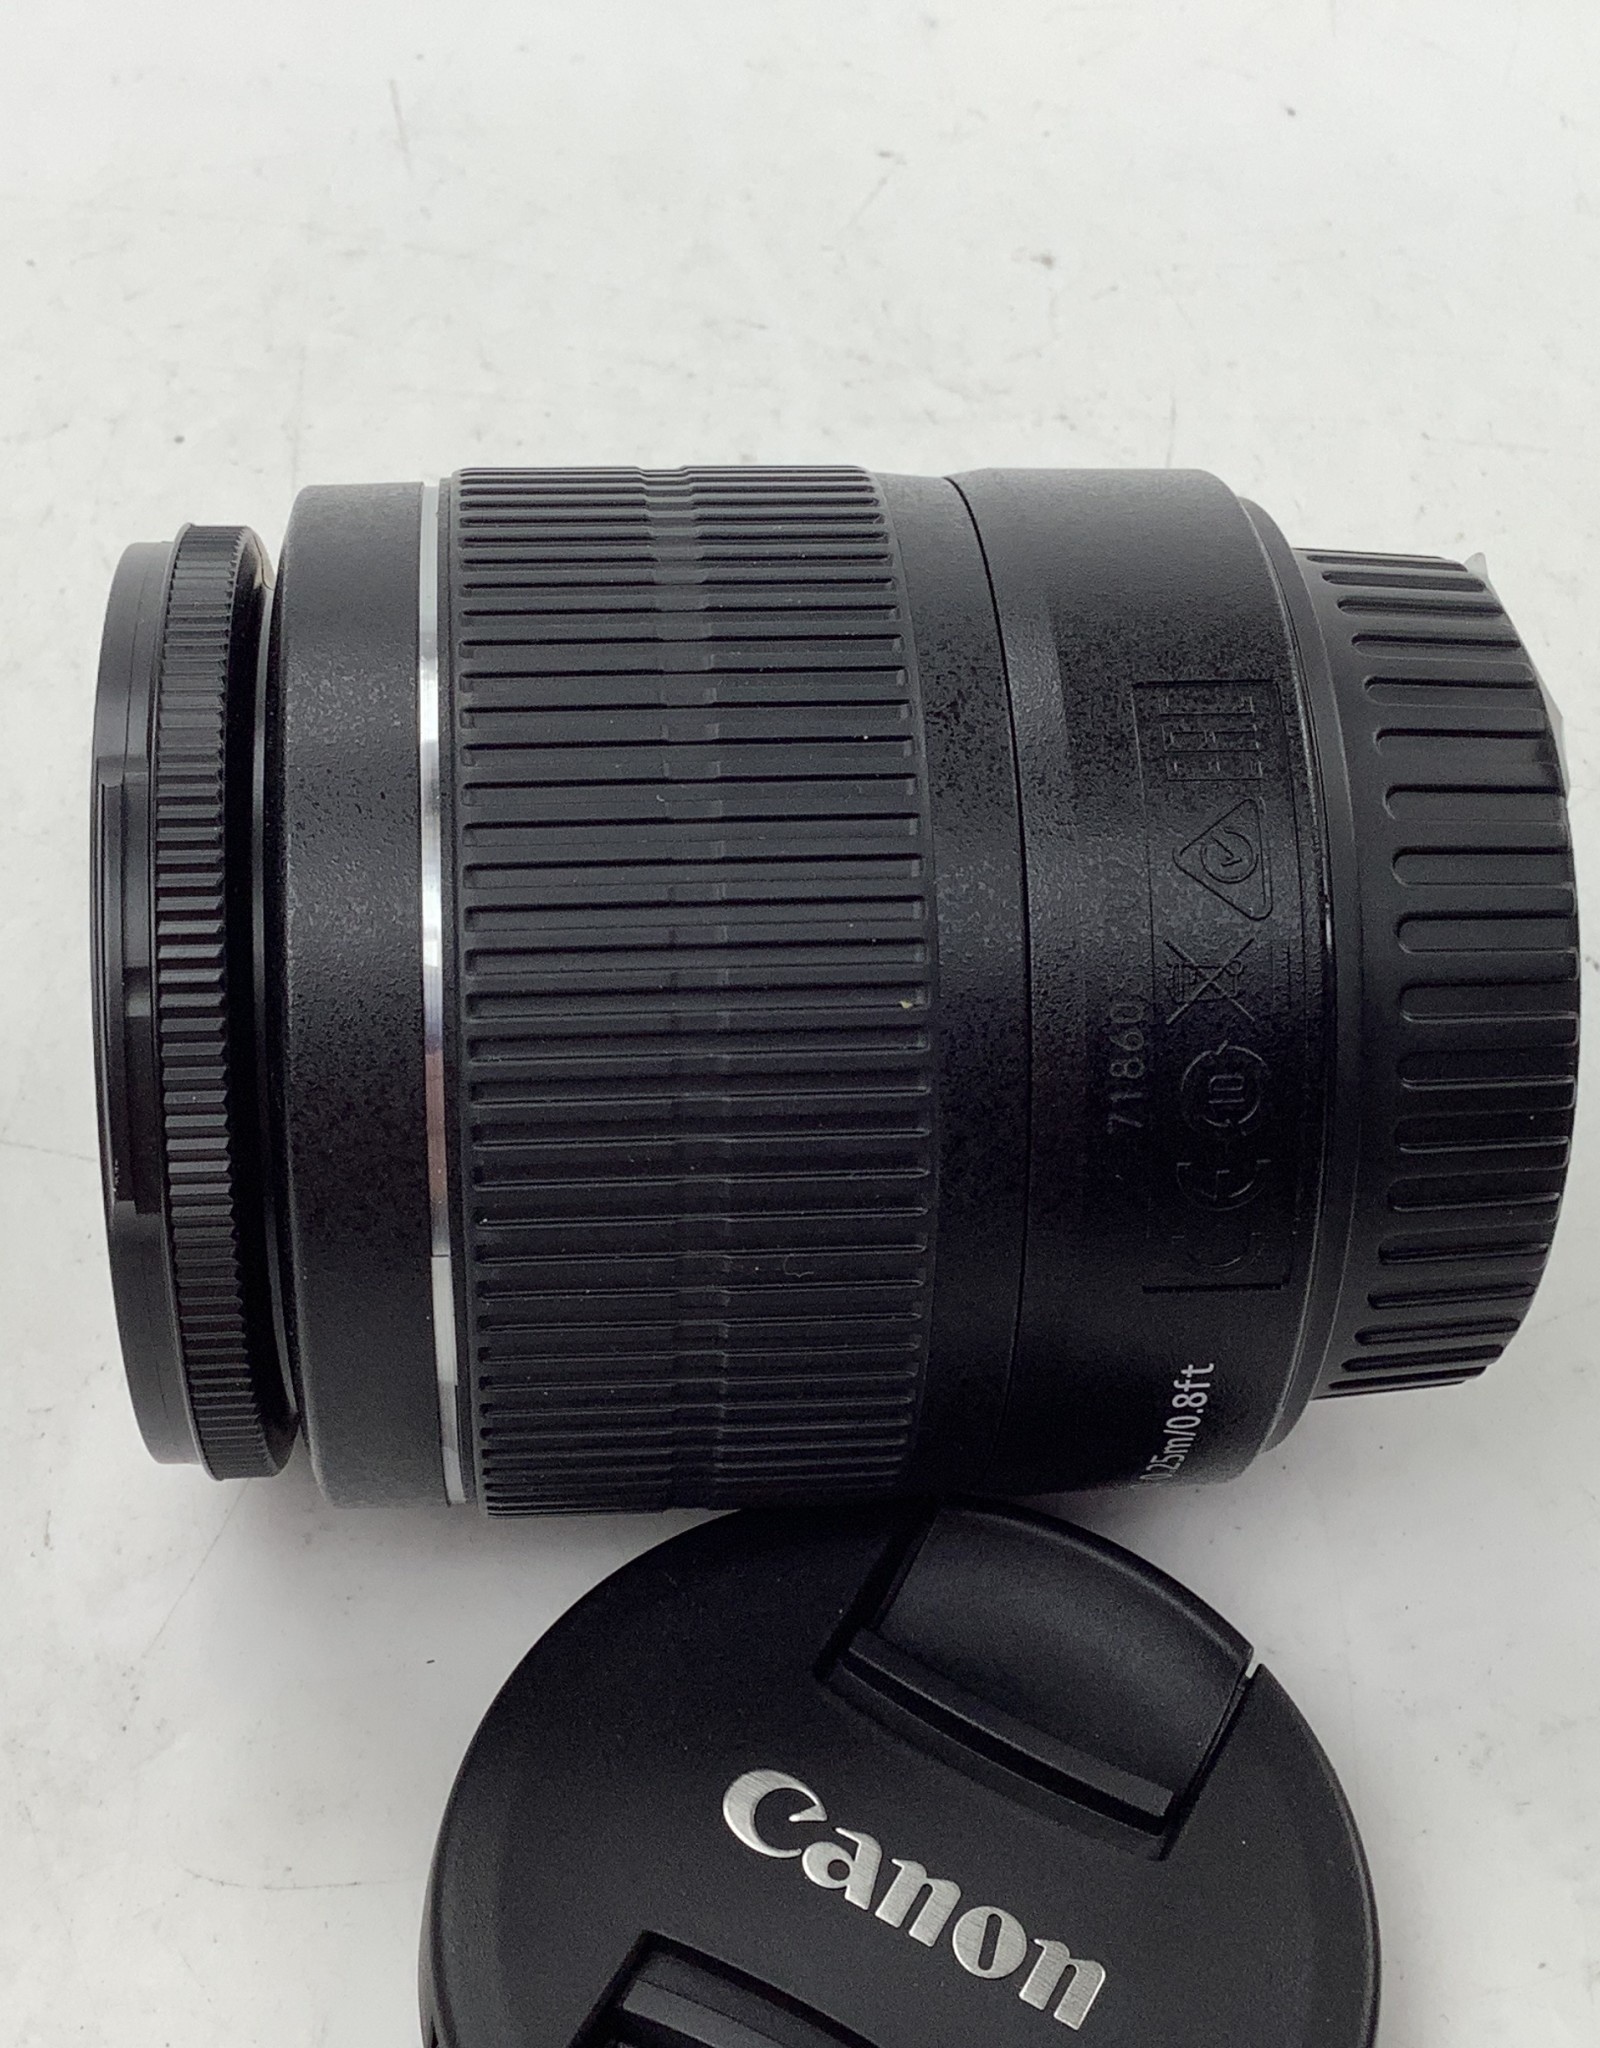 CANON Canon EF-S 18-55mm f3.5-5.6 IS II Lens Used Good